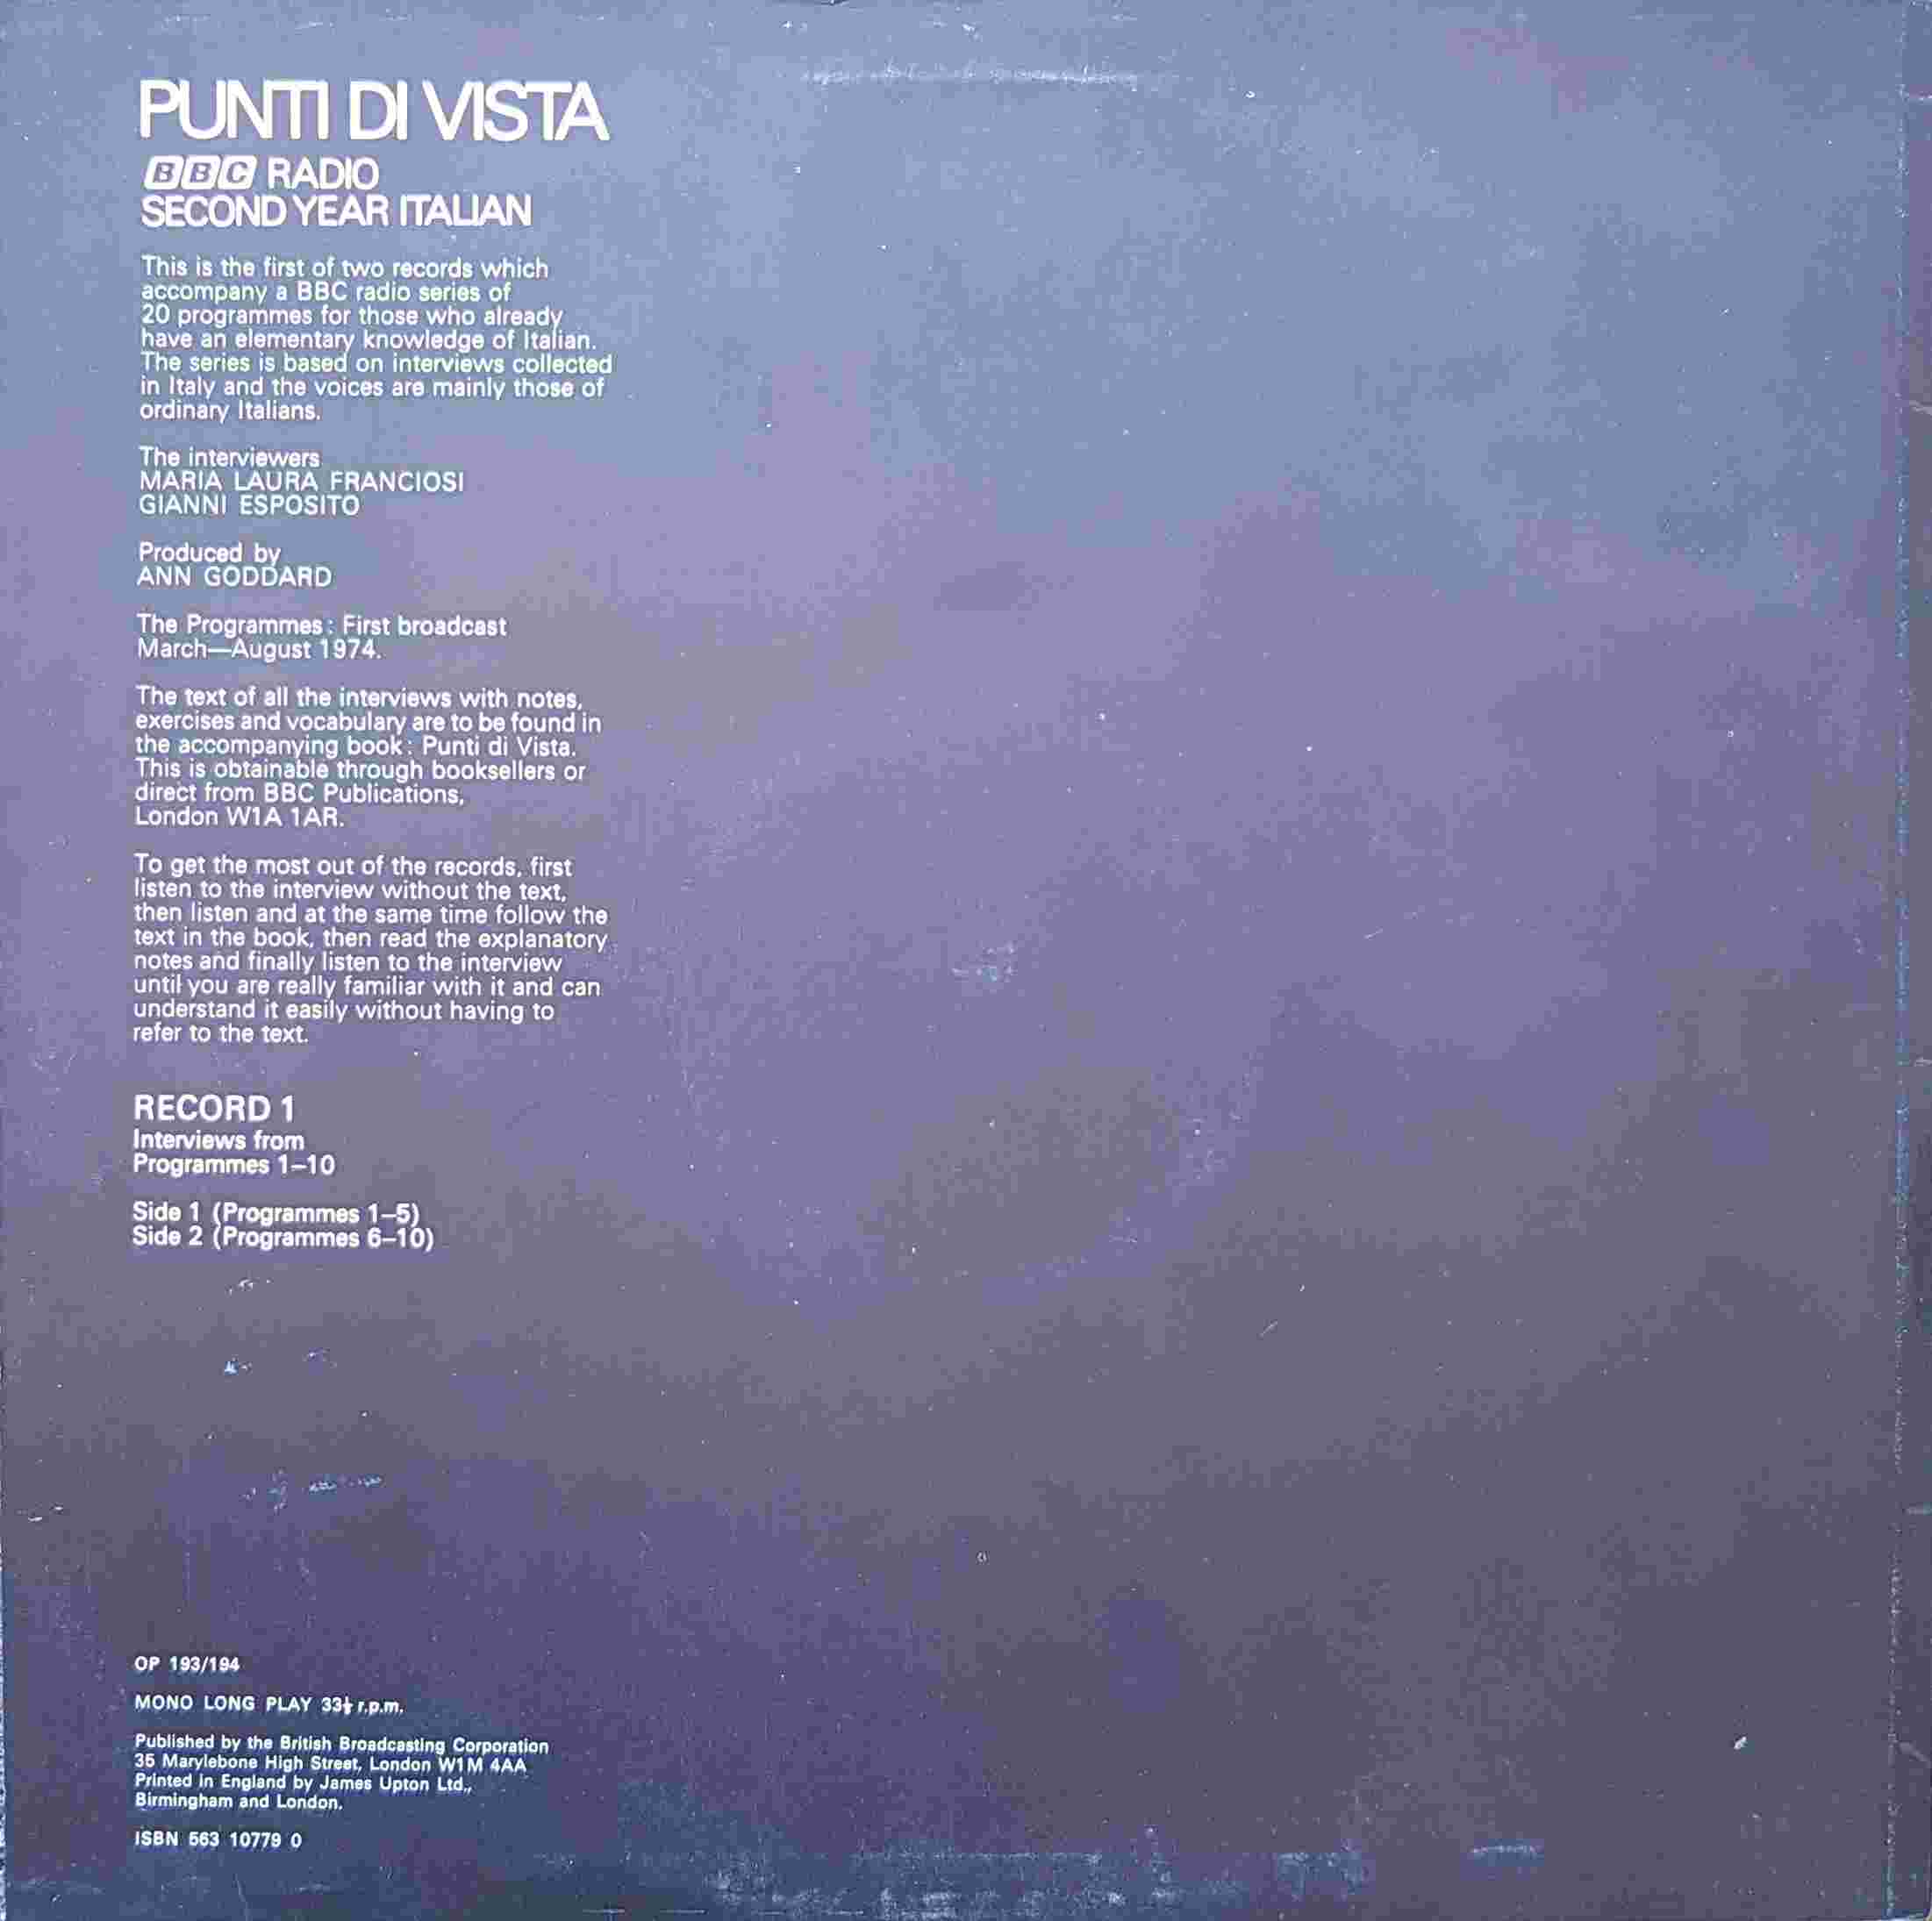 Picture of OP 193/194 Punti di vista - BBC Radio second year Italian - Record 1 - Programmes 1 - 10 by artist Various from the BBC records and Tapes library